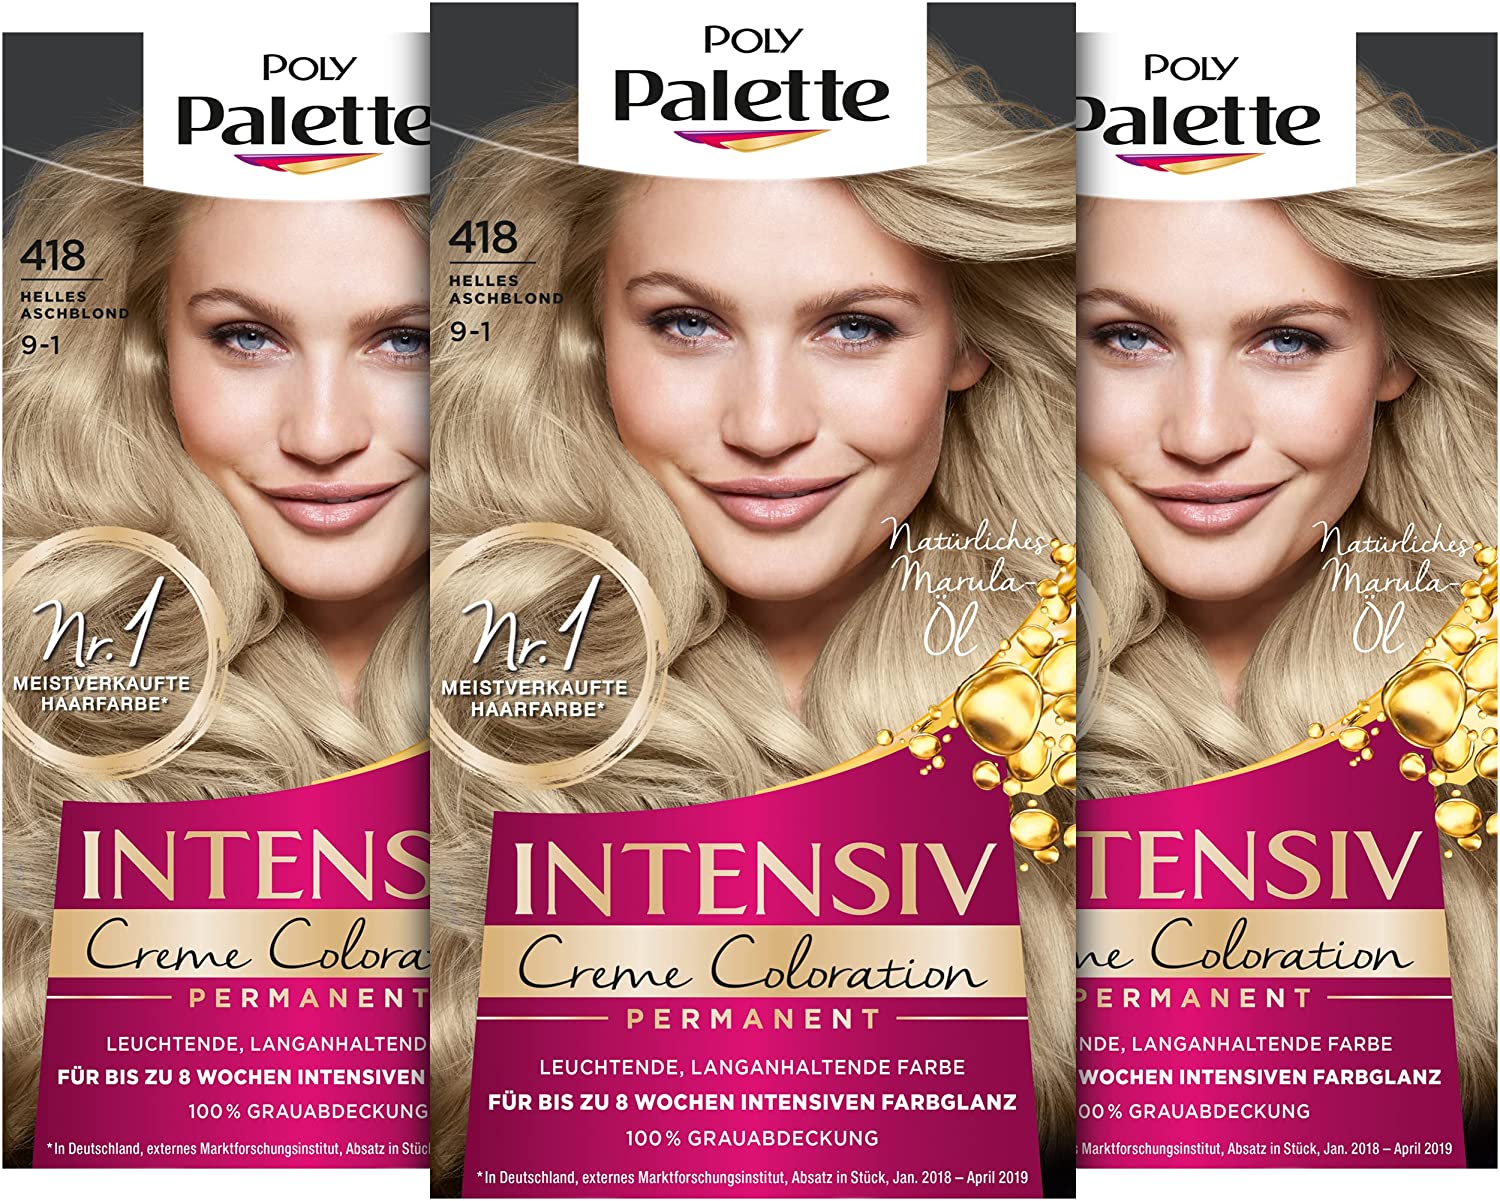 Poly Palette Intensive Cream Colouration 9-1/418 Light Ash Blonde Level 3 (3 x 115 ml), Permanent Colouration for up to 8 Weeks of Intense Colour Shine & 100% Grey Coverage, ‎ivory-coloured